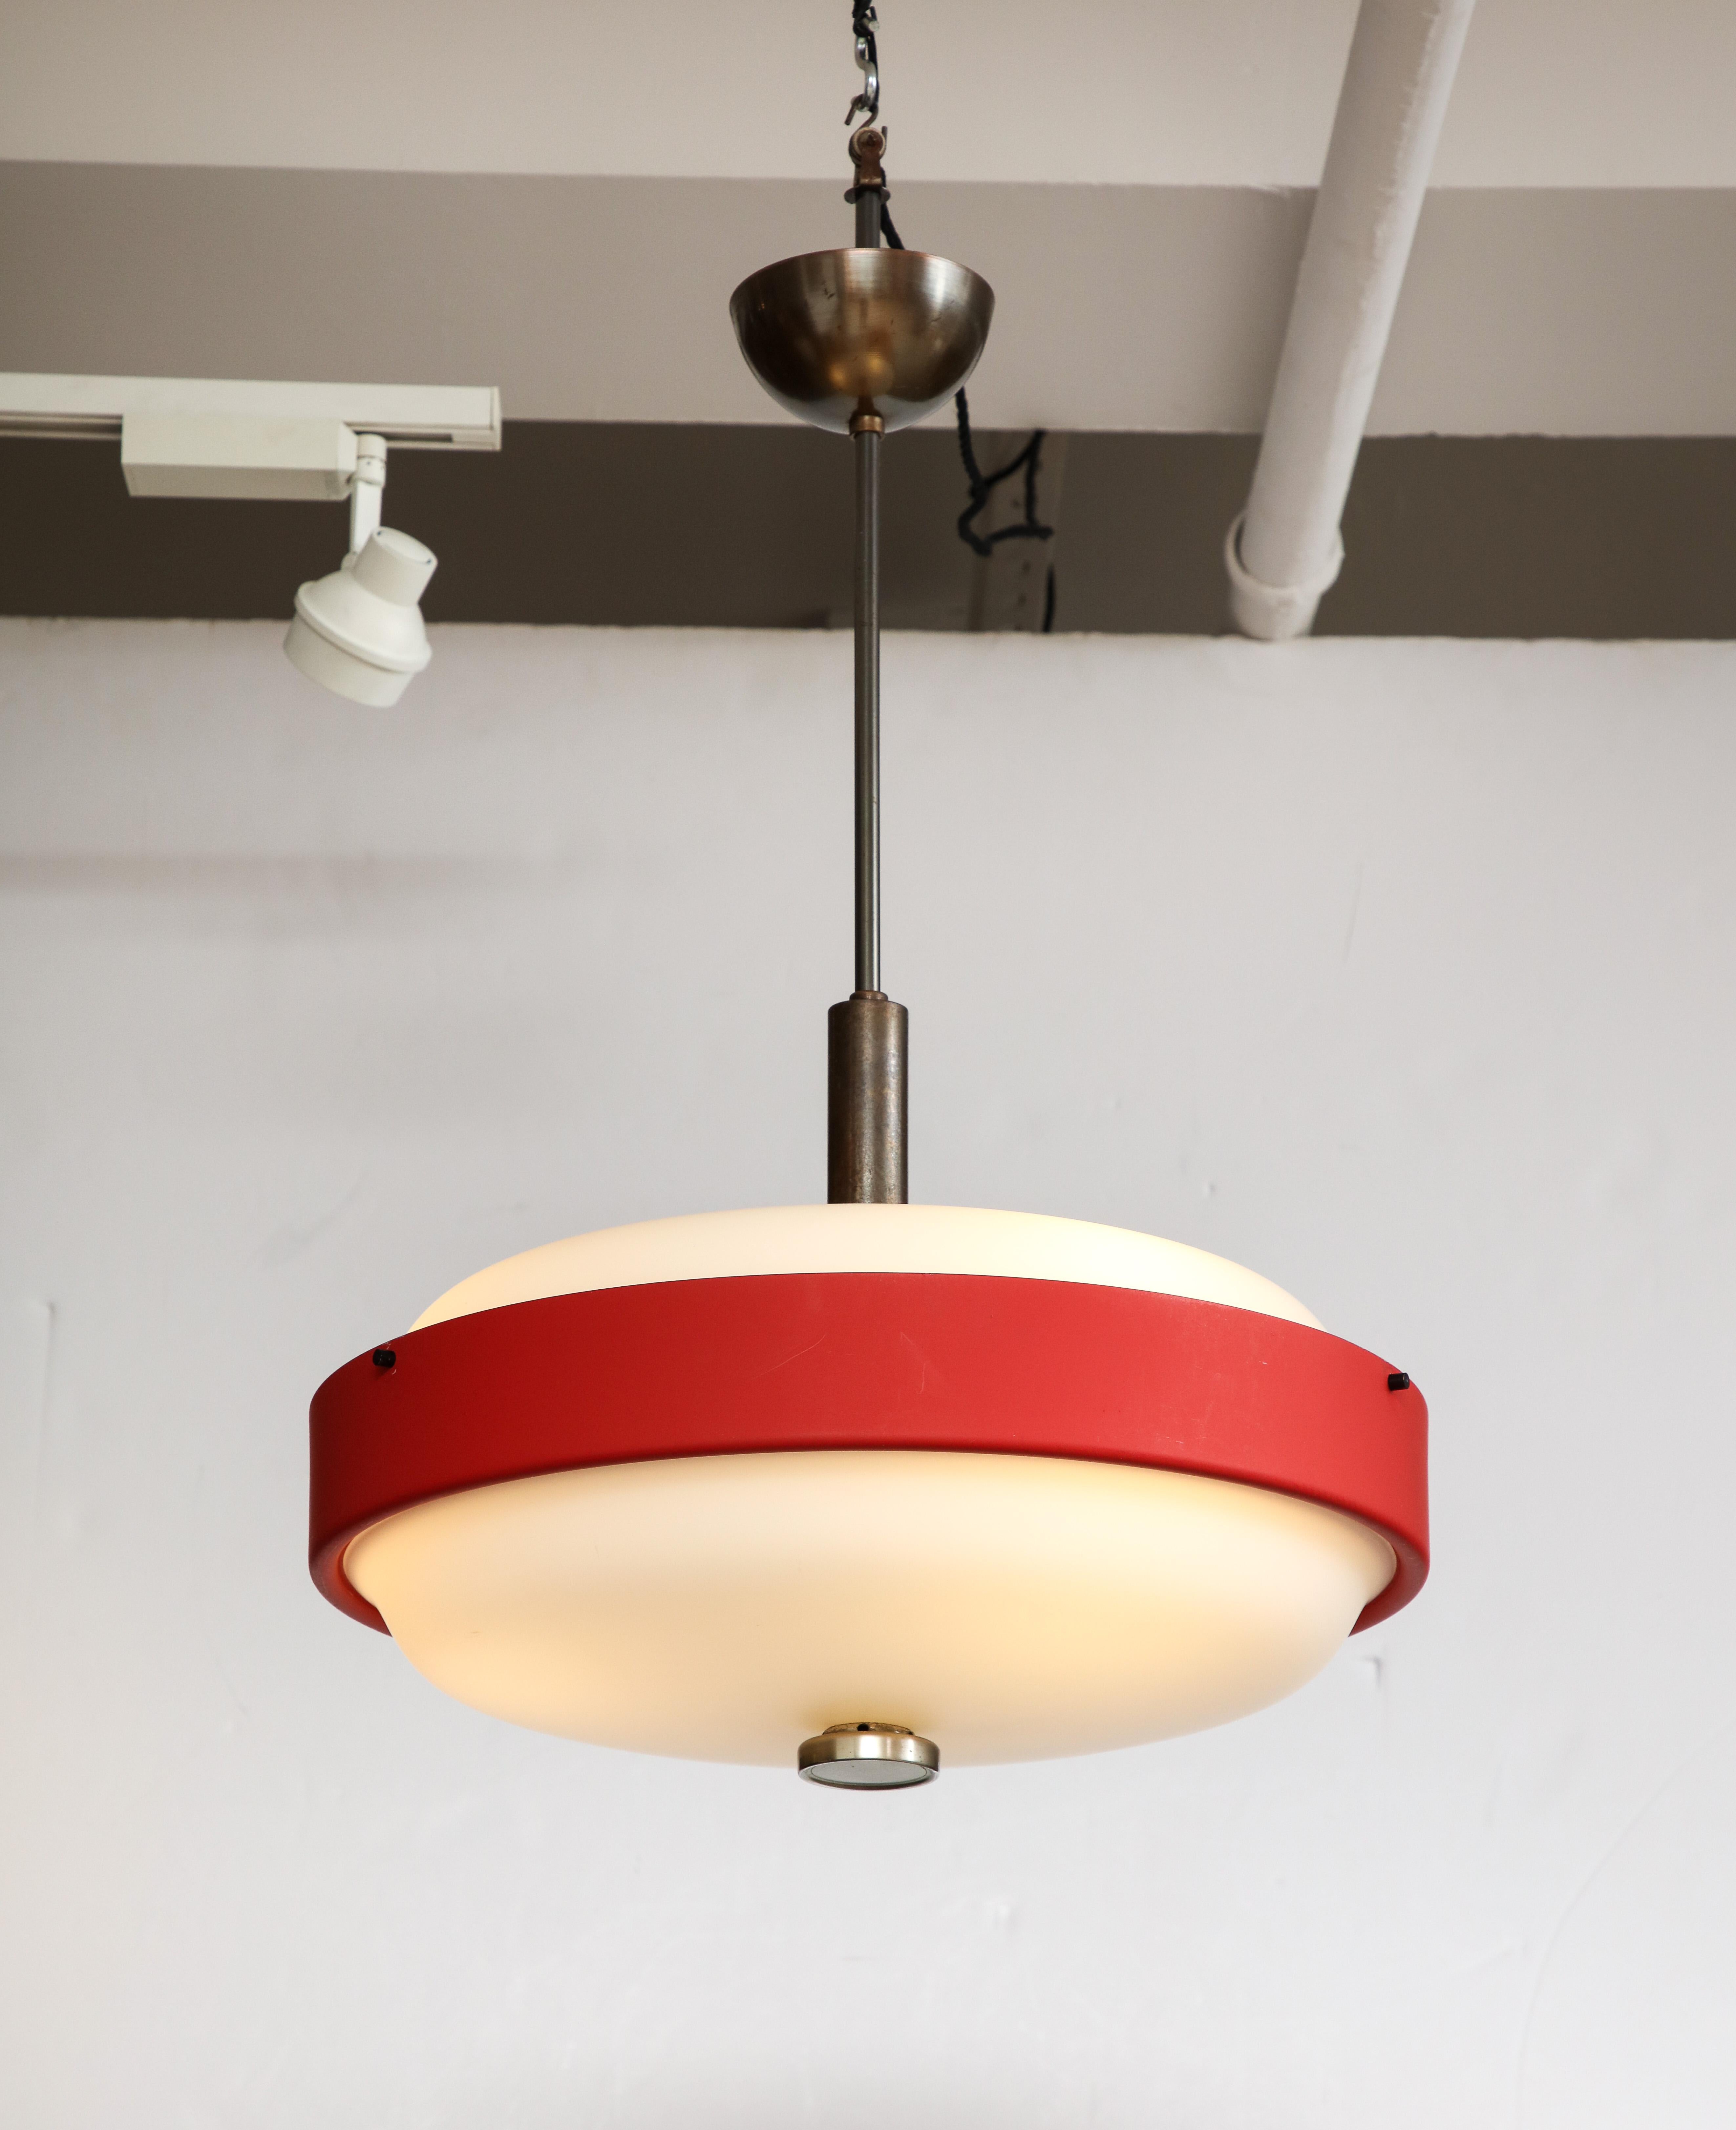 Italian Red Enamel & Brushed Steel Opaline Glass Chandelier, Lumi, Italy, 1960 In Good Condition For Sale In Brooklyn, NY